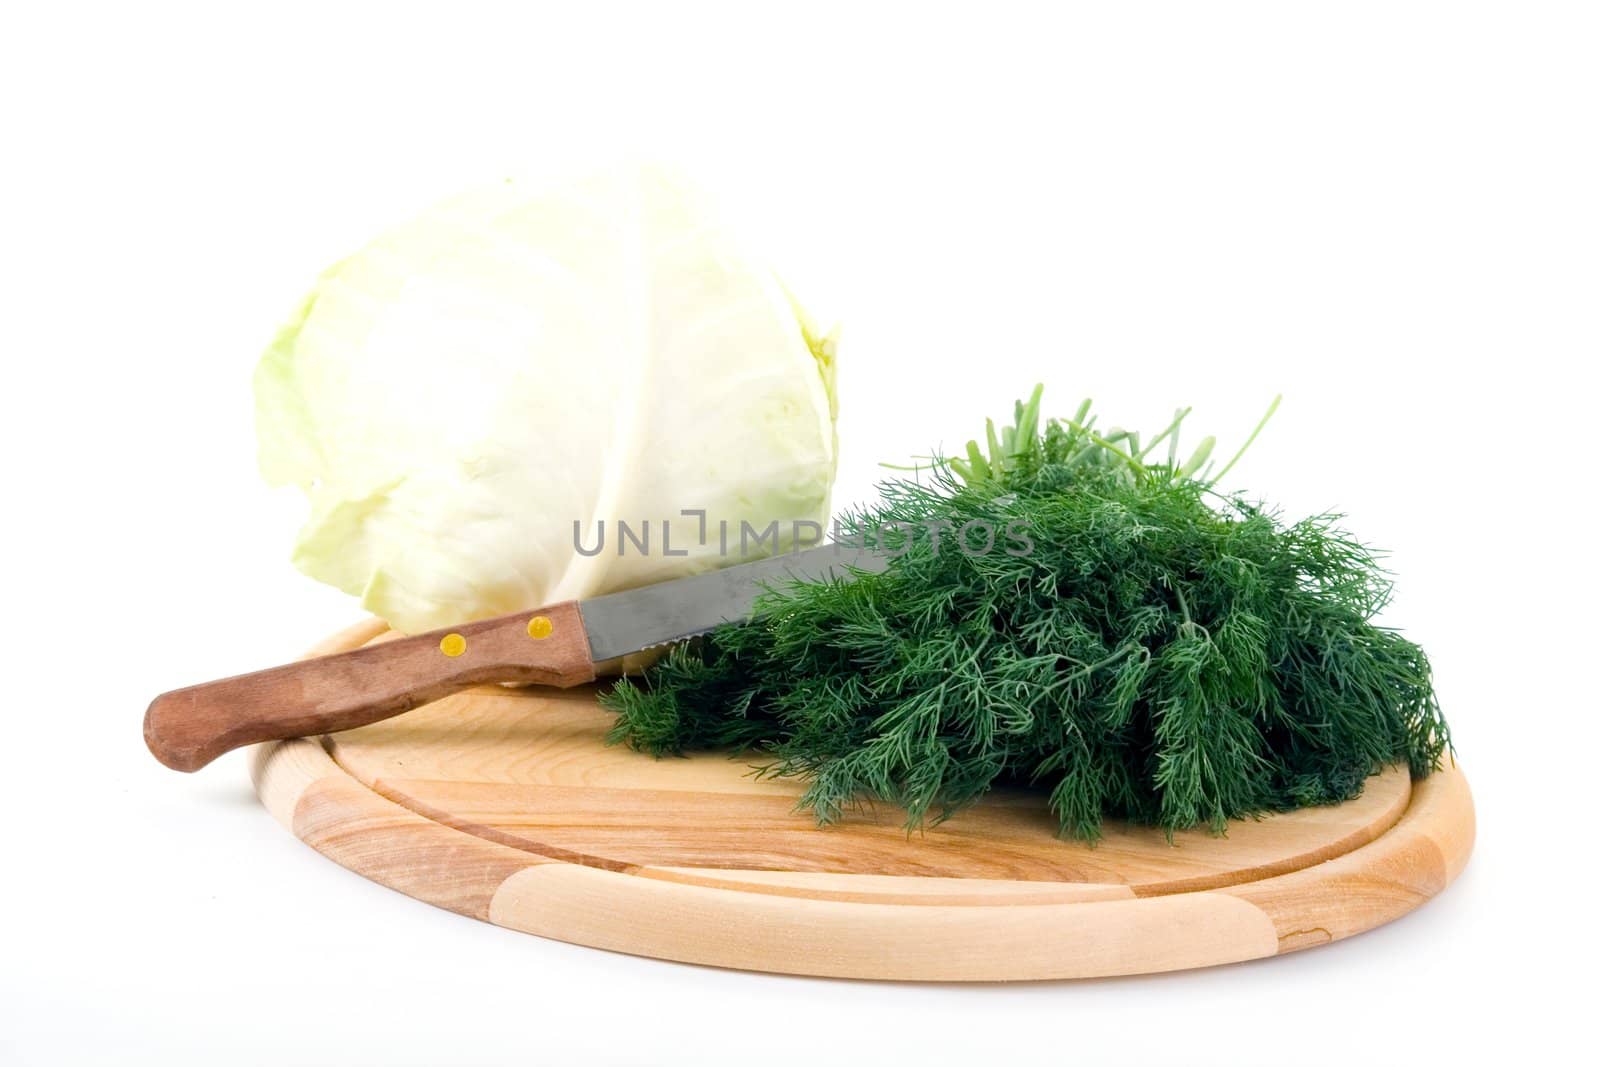 Cabbage and fennel on a wooden cutting board on a white background